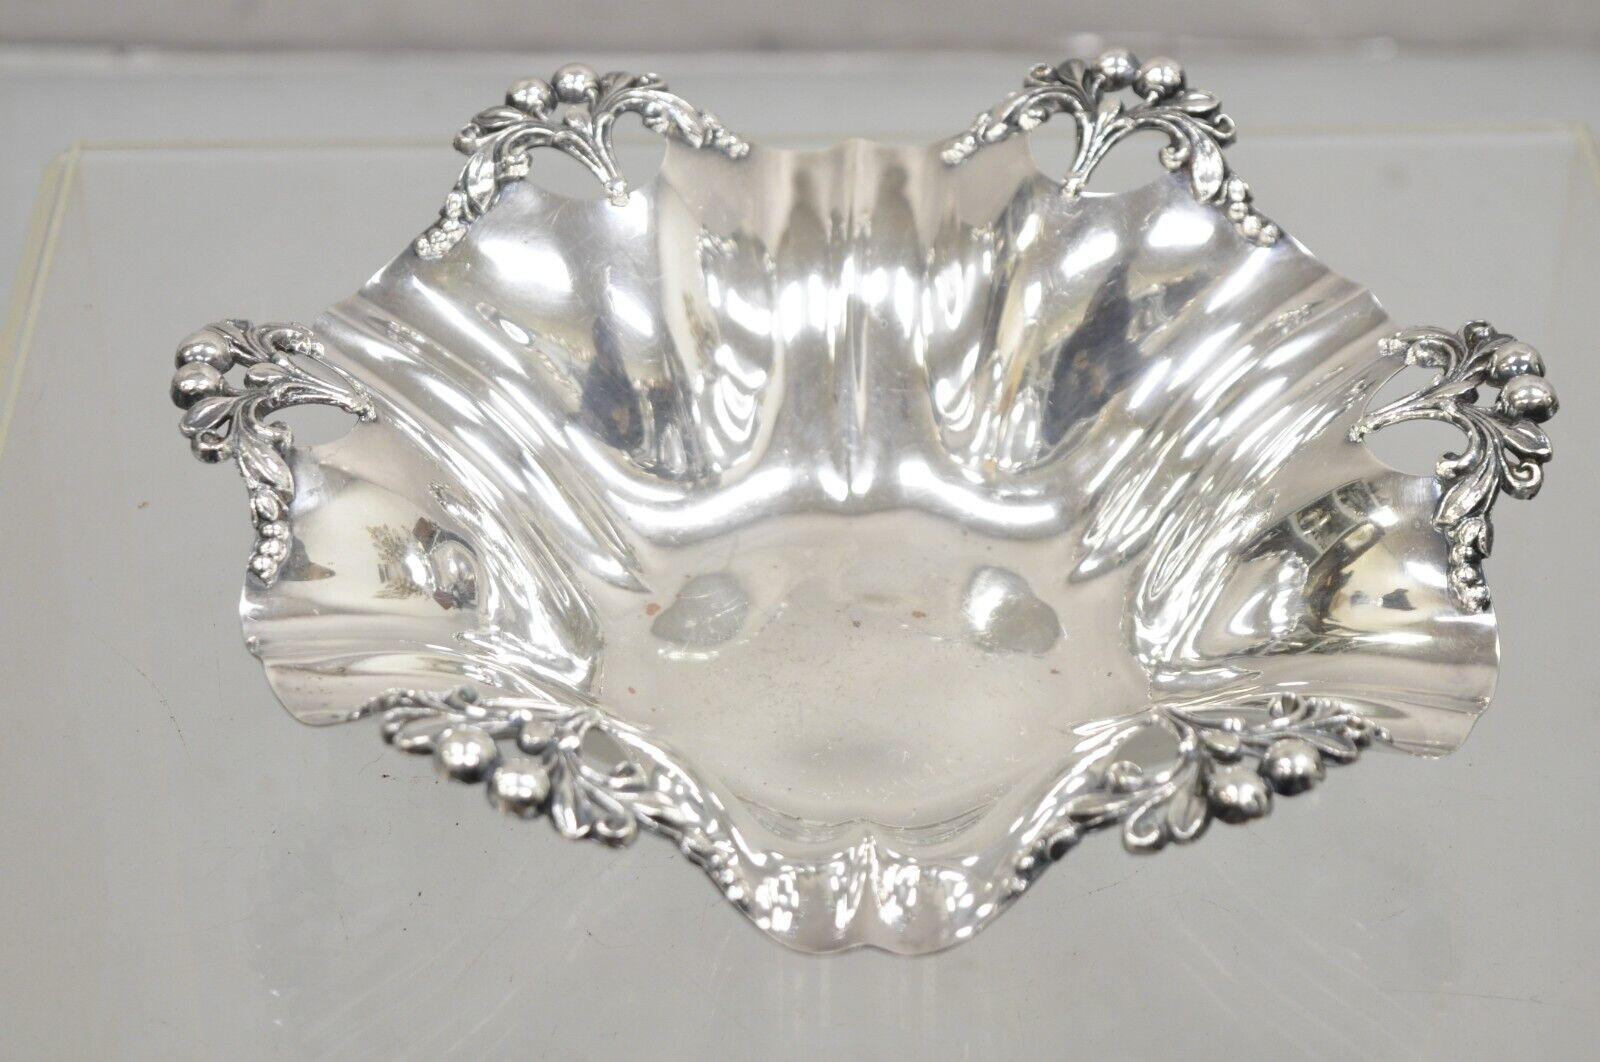 Vintage Victorian Silver Plated Handkerchief Candy Dish Fruit Bowl with Berry Design. Circa Mid 20th Century. Measurements: 3